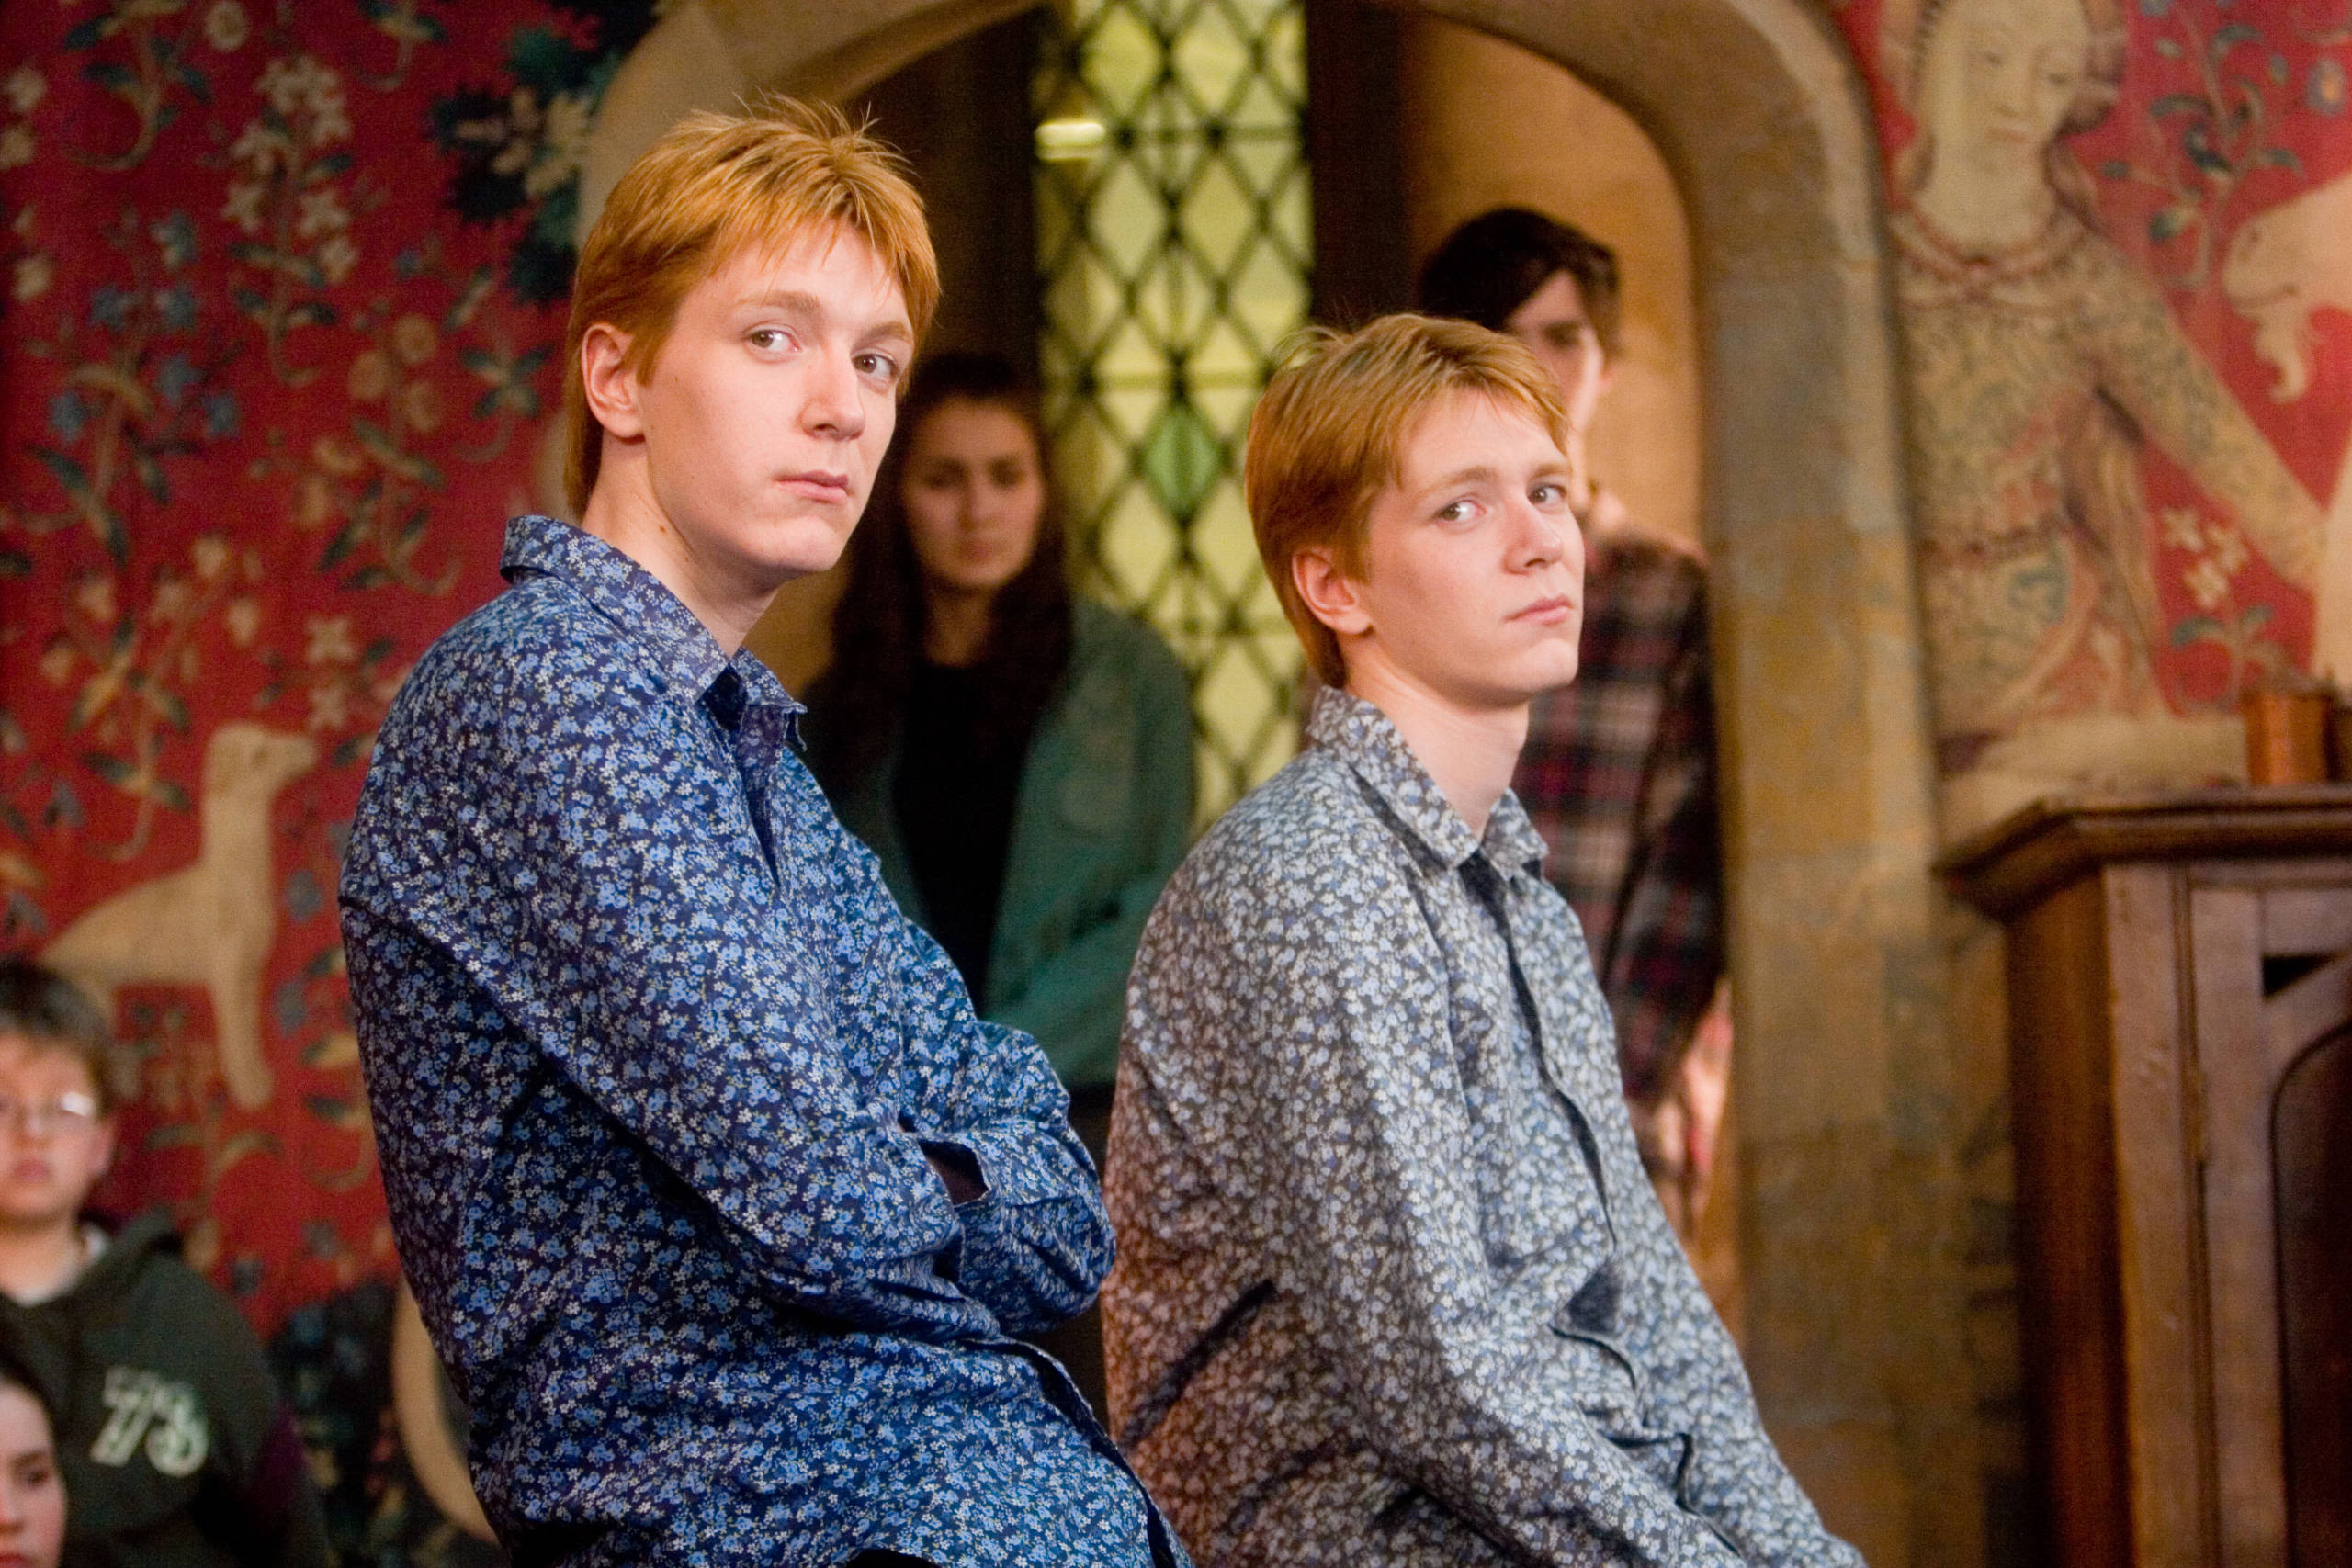 WB F5 FredAndGeorge GryffindorCommonRoomShirts SombreFaces HP5D-2066